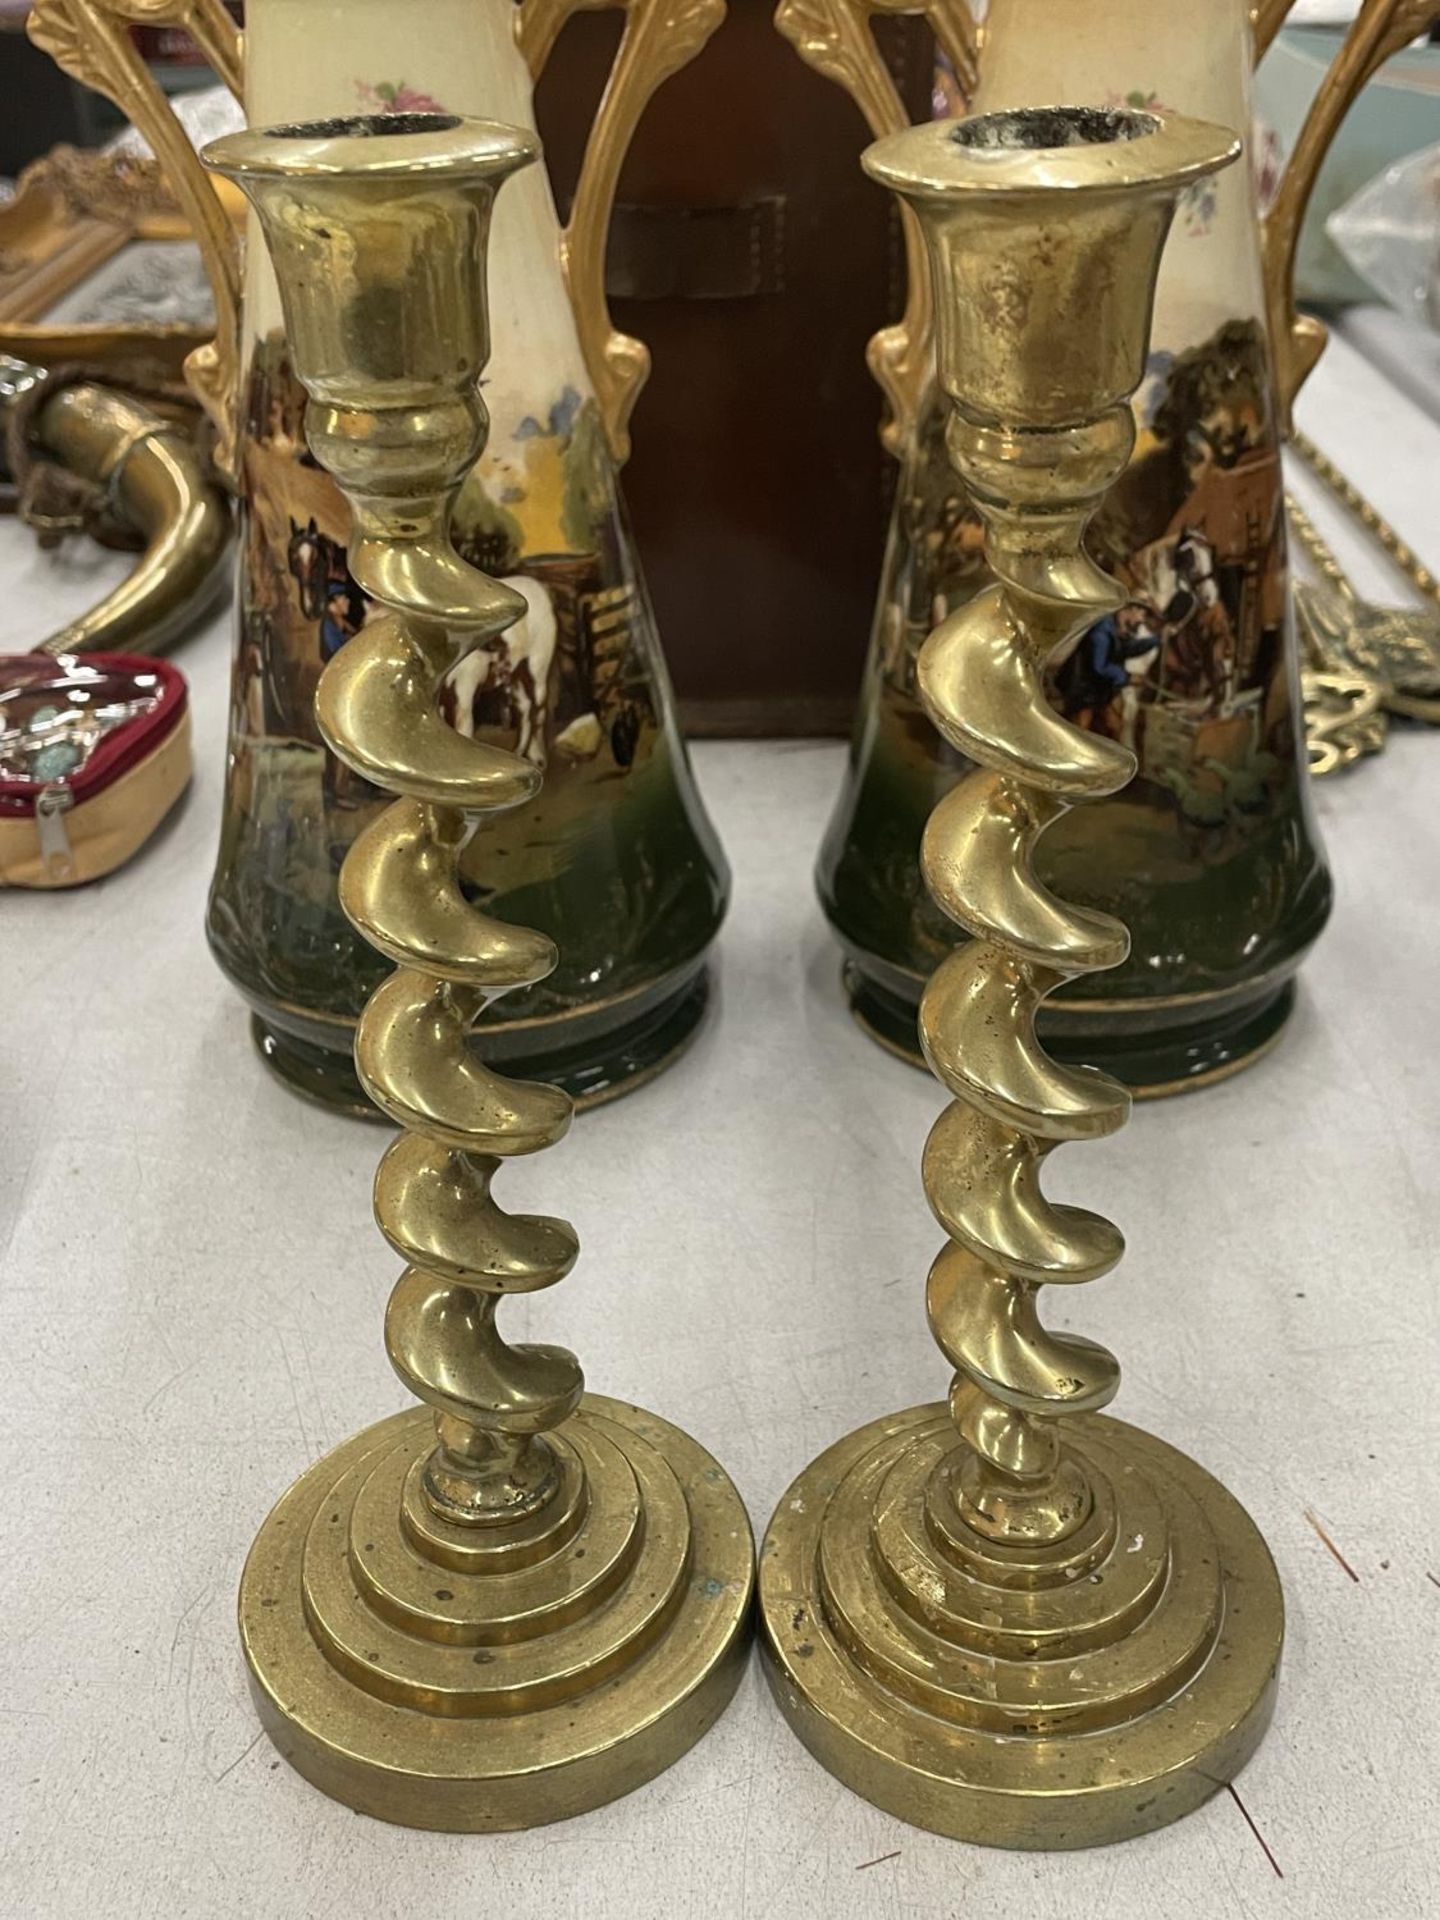 A PAIR OF HEAVY VINTAGE BRASS CANDLESTICKS WITH BARLEY TWIST STEMS, HEIGHT 23CM